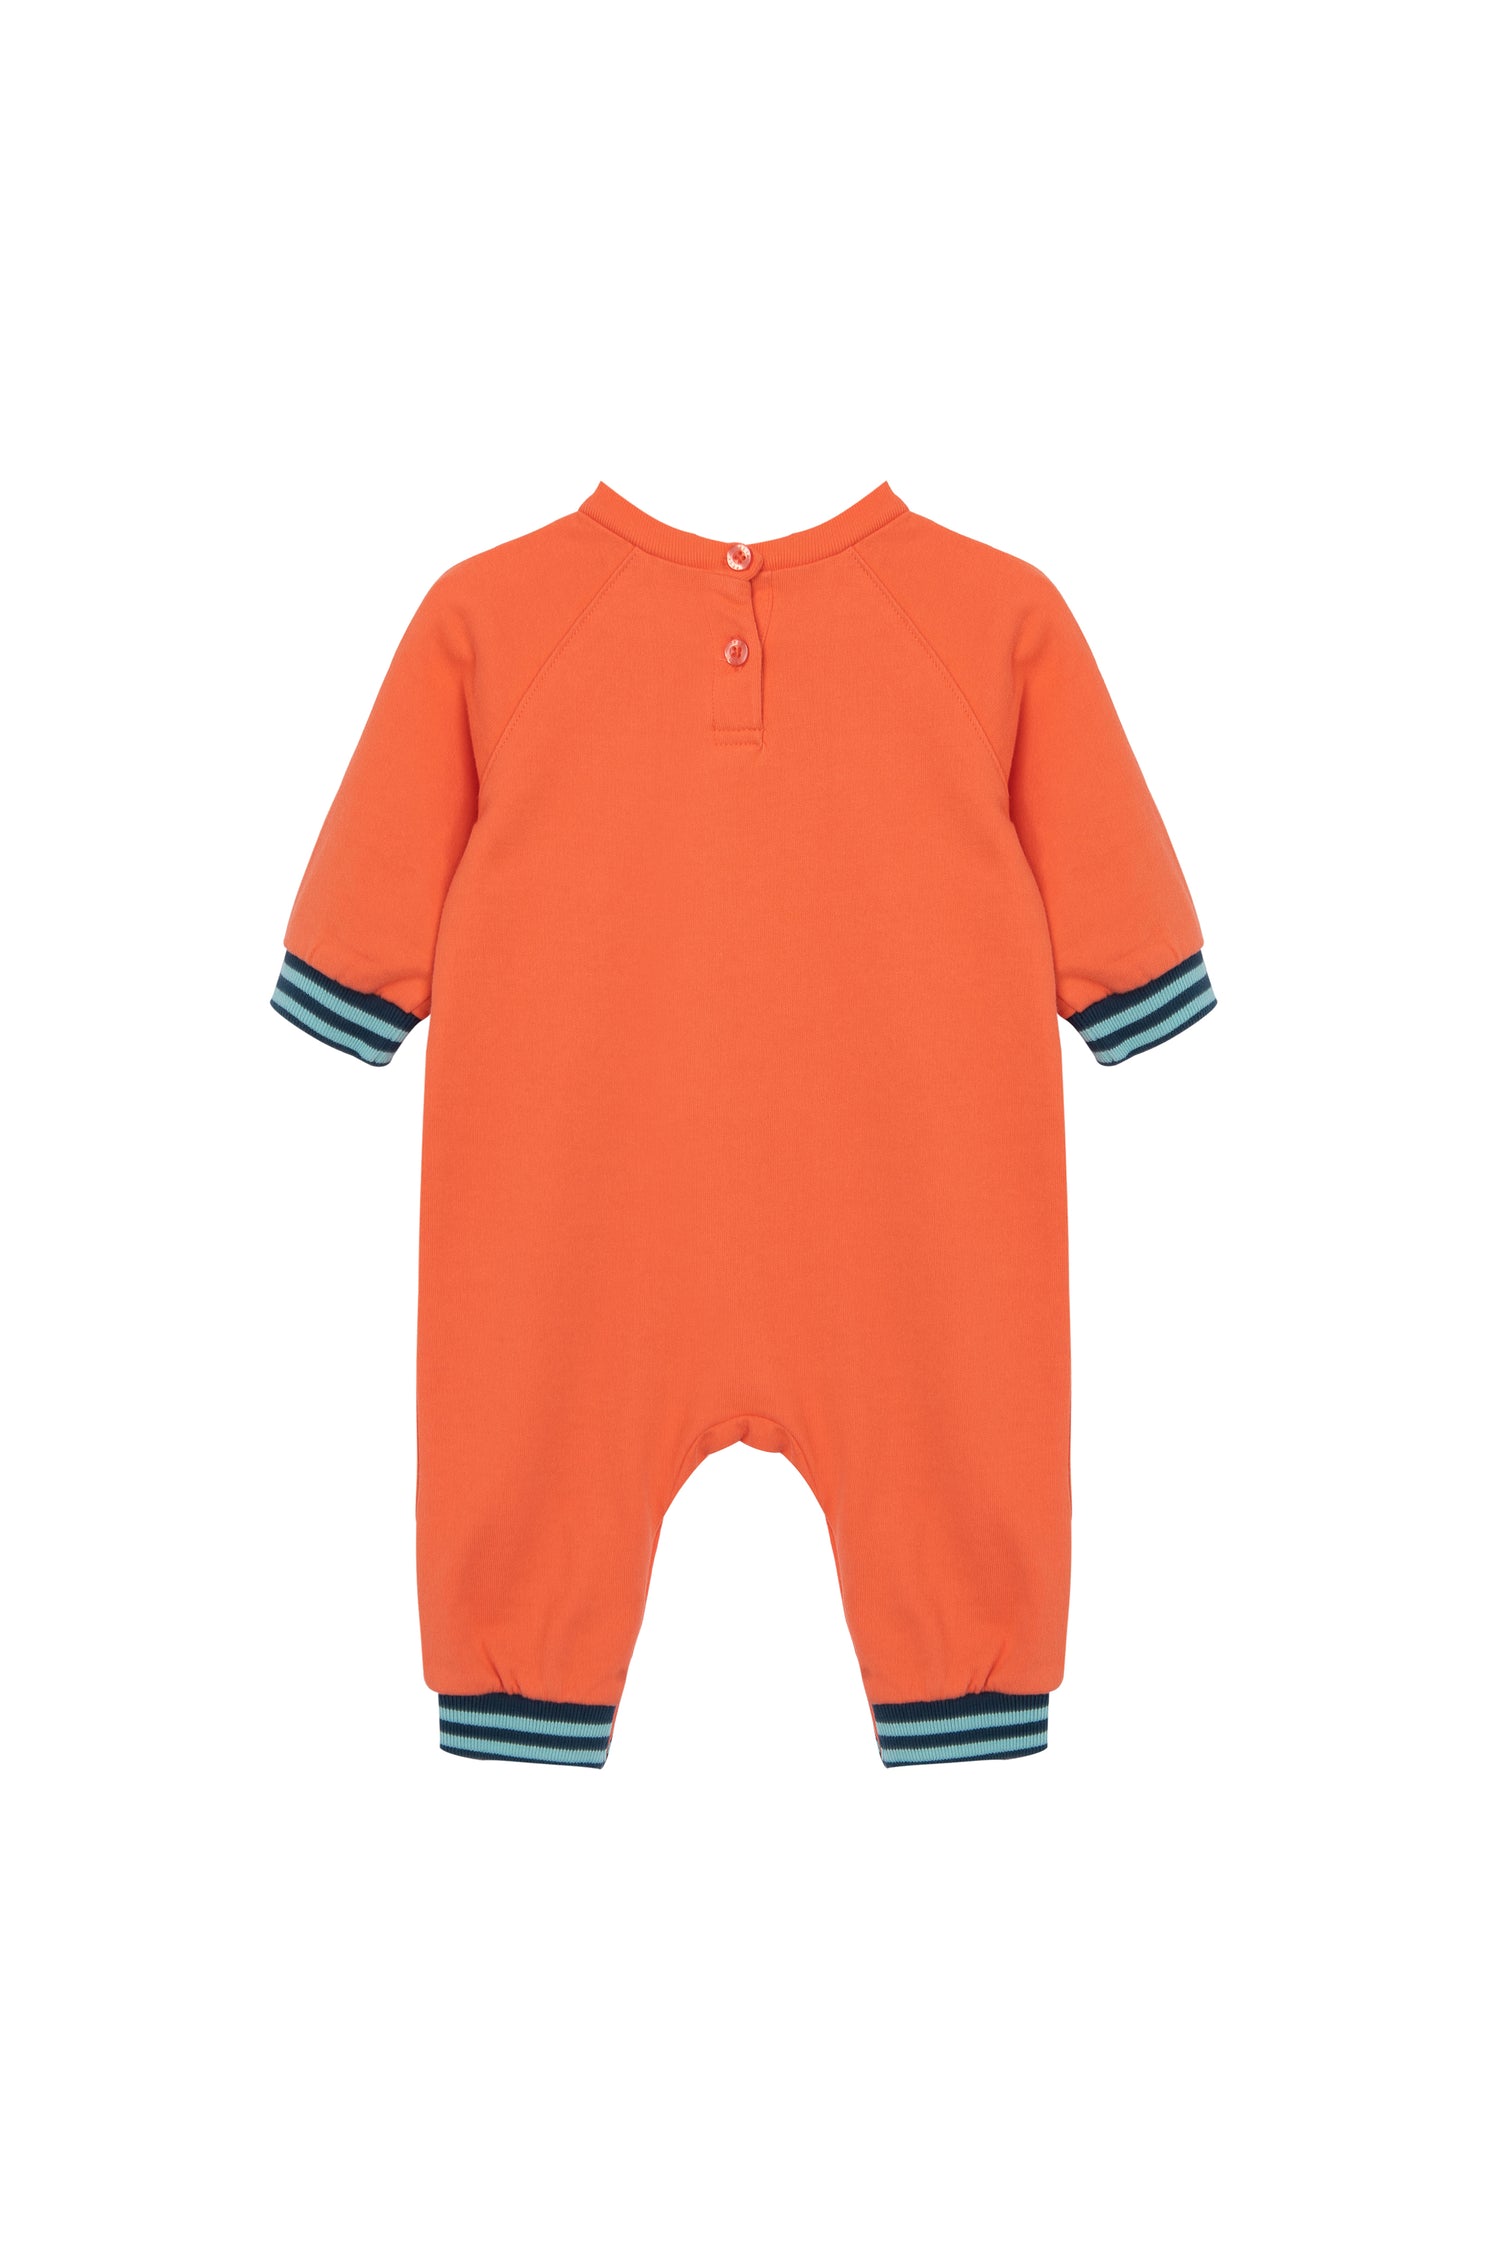 Back view of orange baby jumpsuit